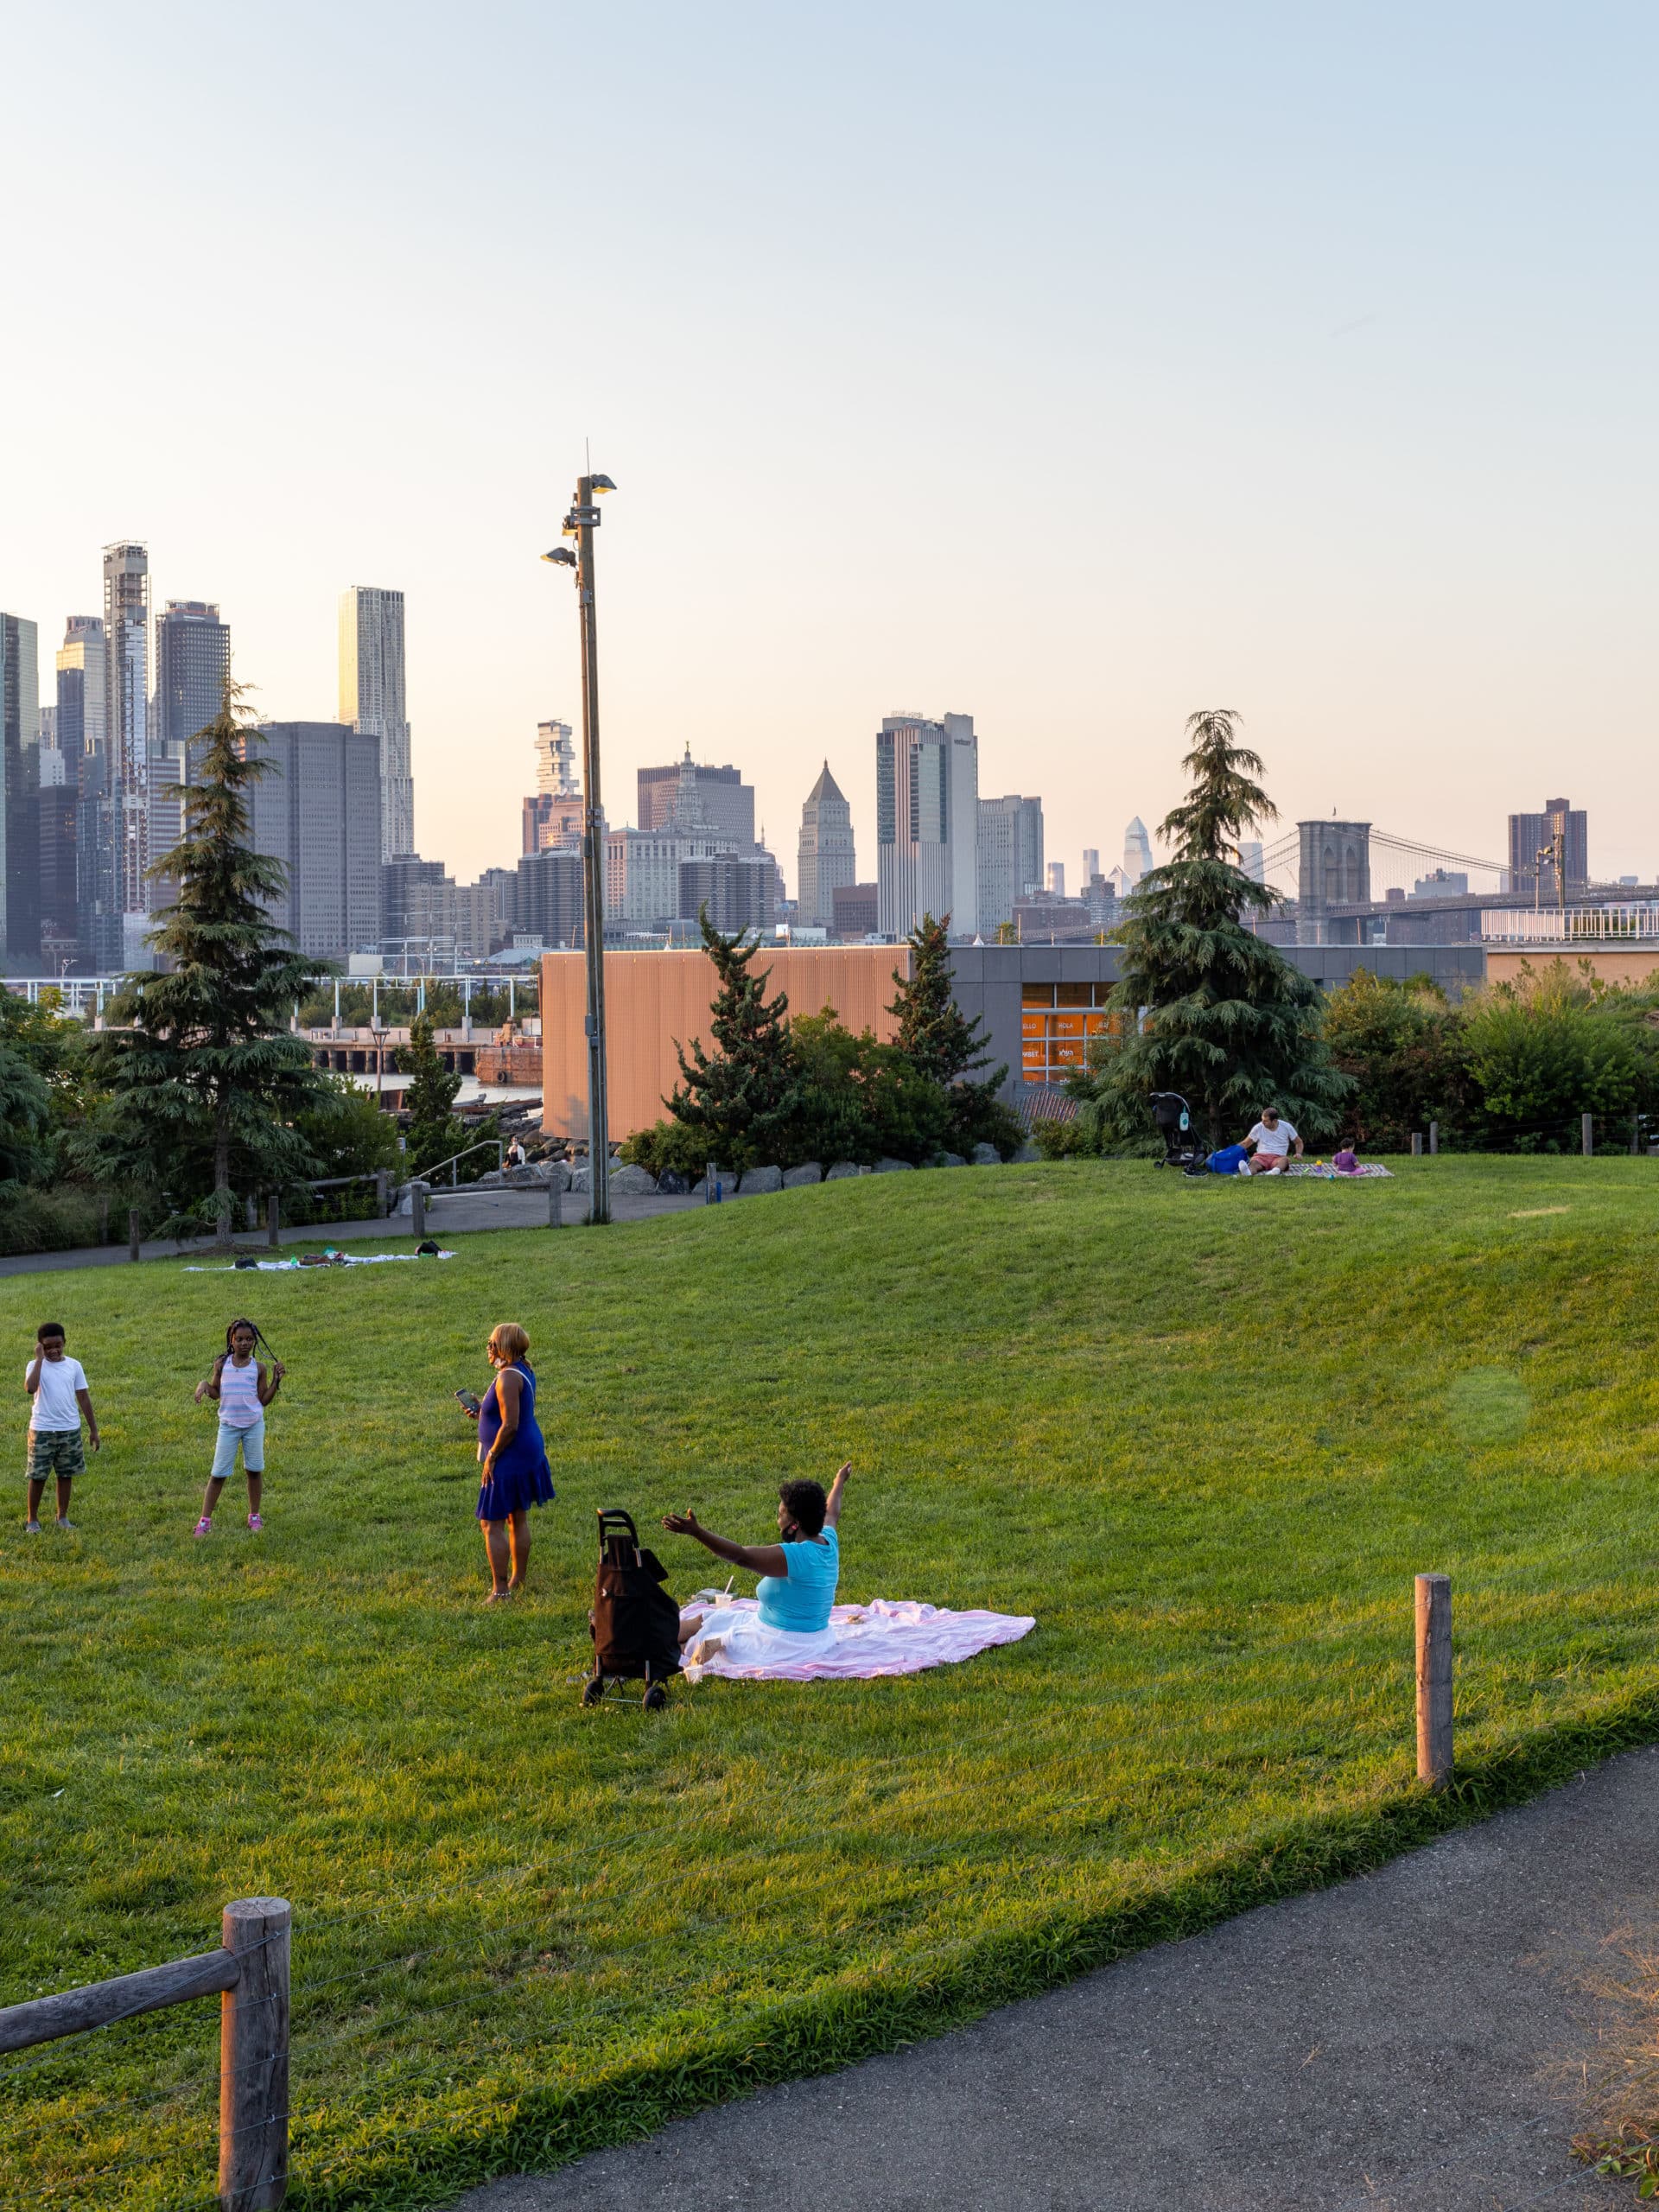 People picnicking on Pier 5 Uplands Lawn at sunset.